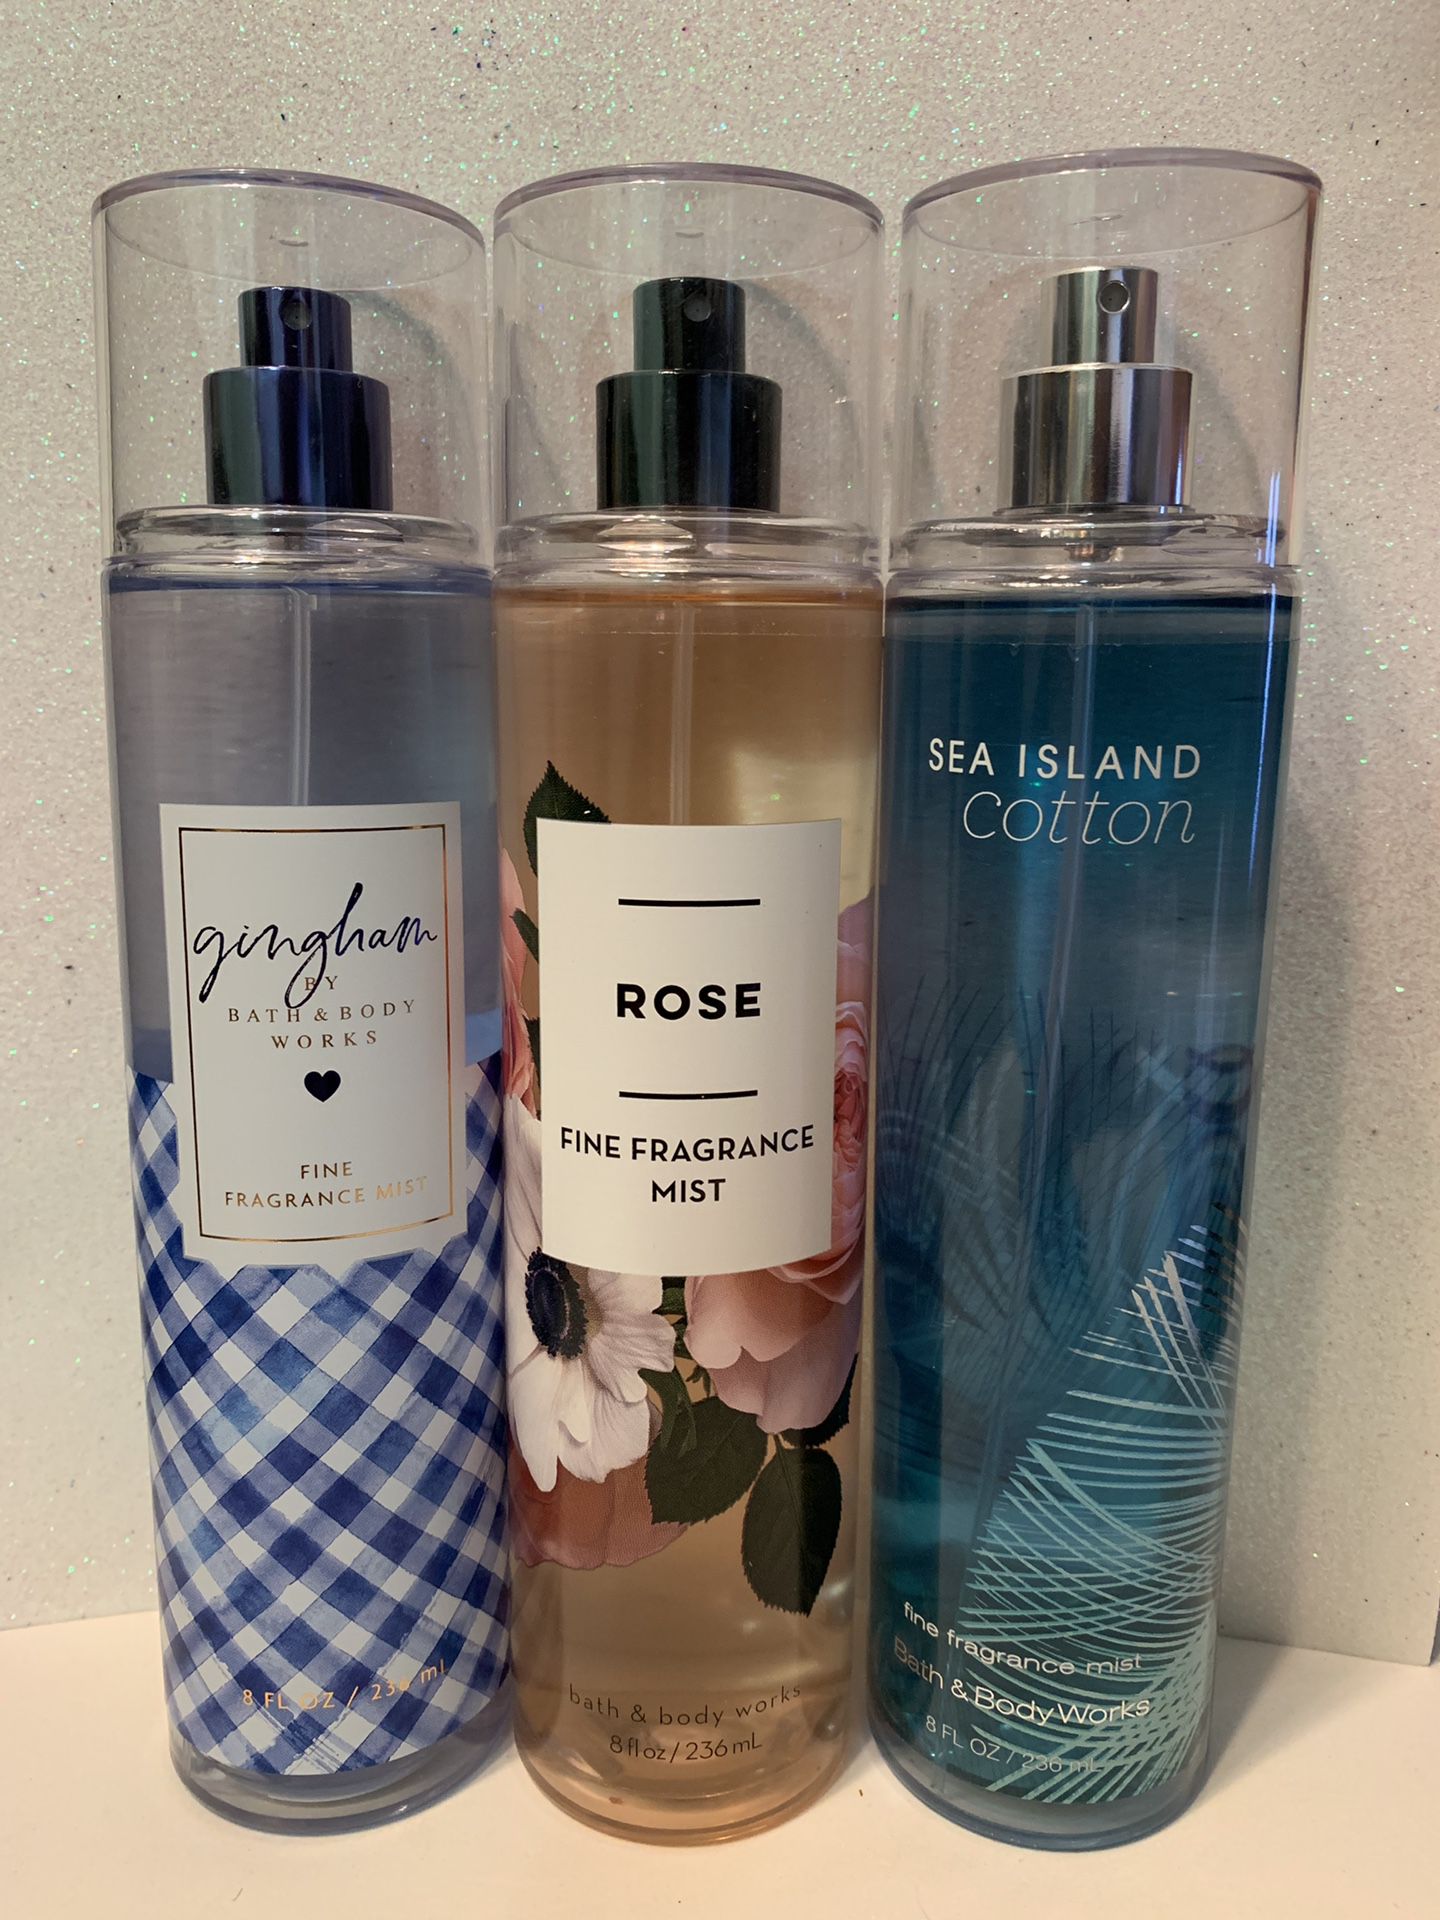 Bath and body works fine fragrance mist new all 3 for $15